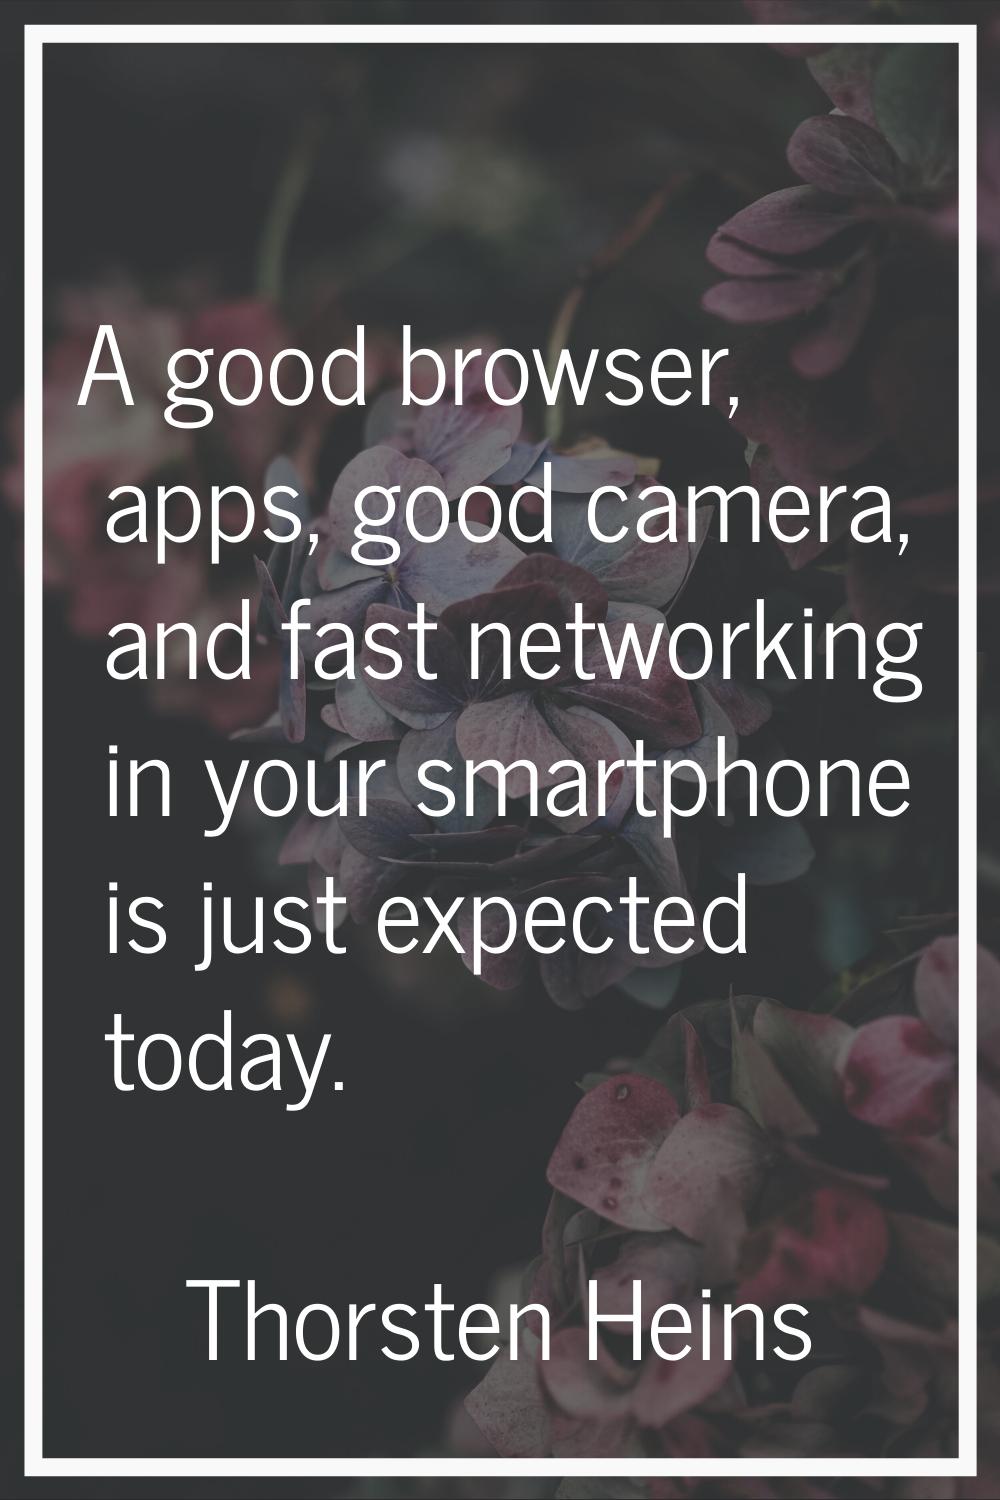 A good browser, apps, good camera, and fast networking in your smartphone is just expected today.